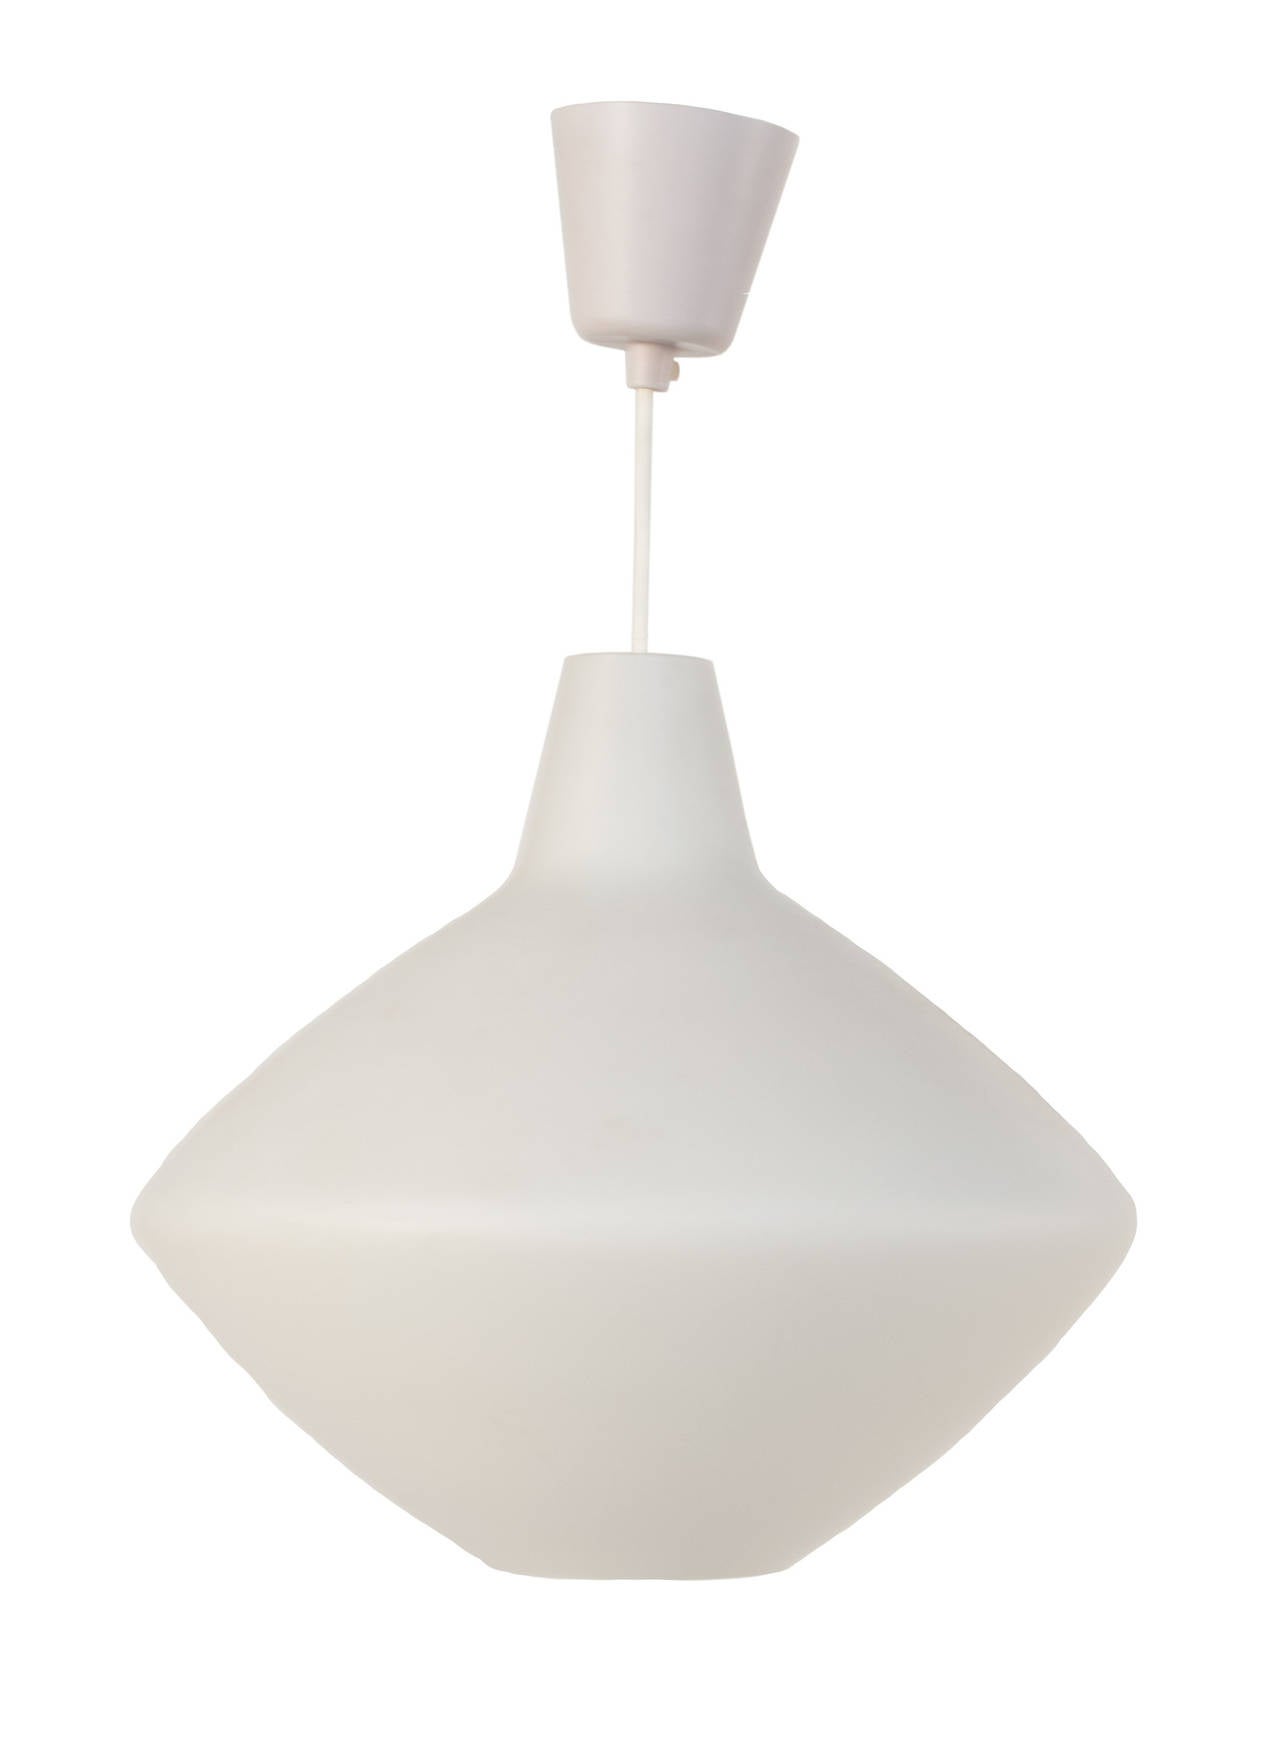 Pair of opaque white glass Pendants by Lisa Johansson-Pape.